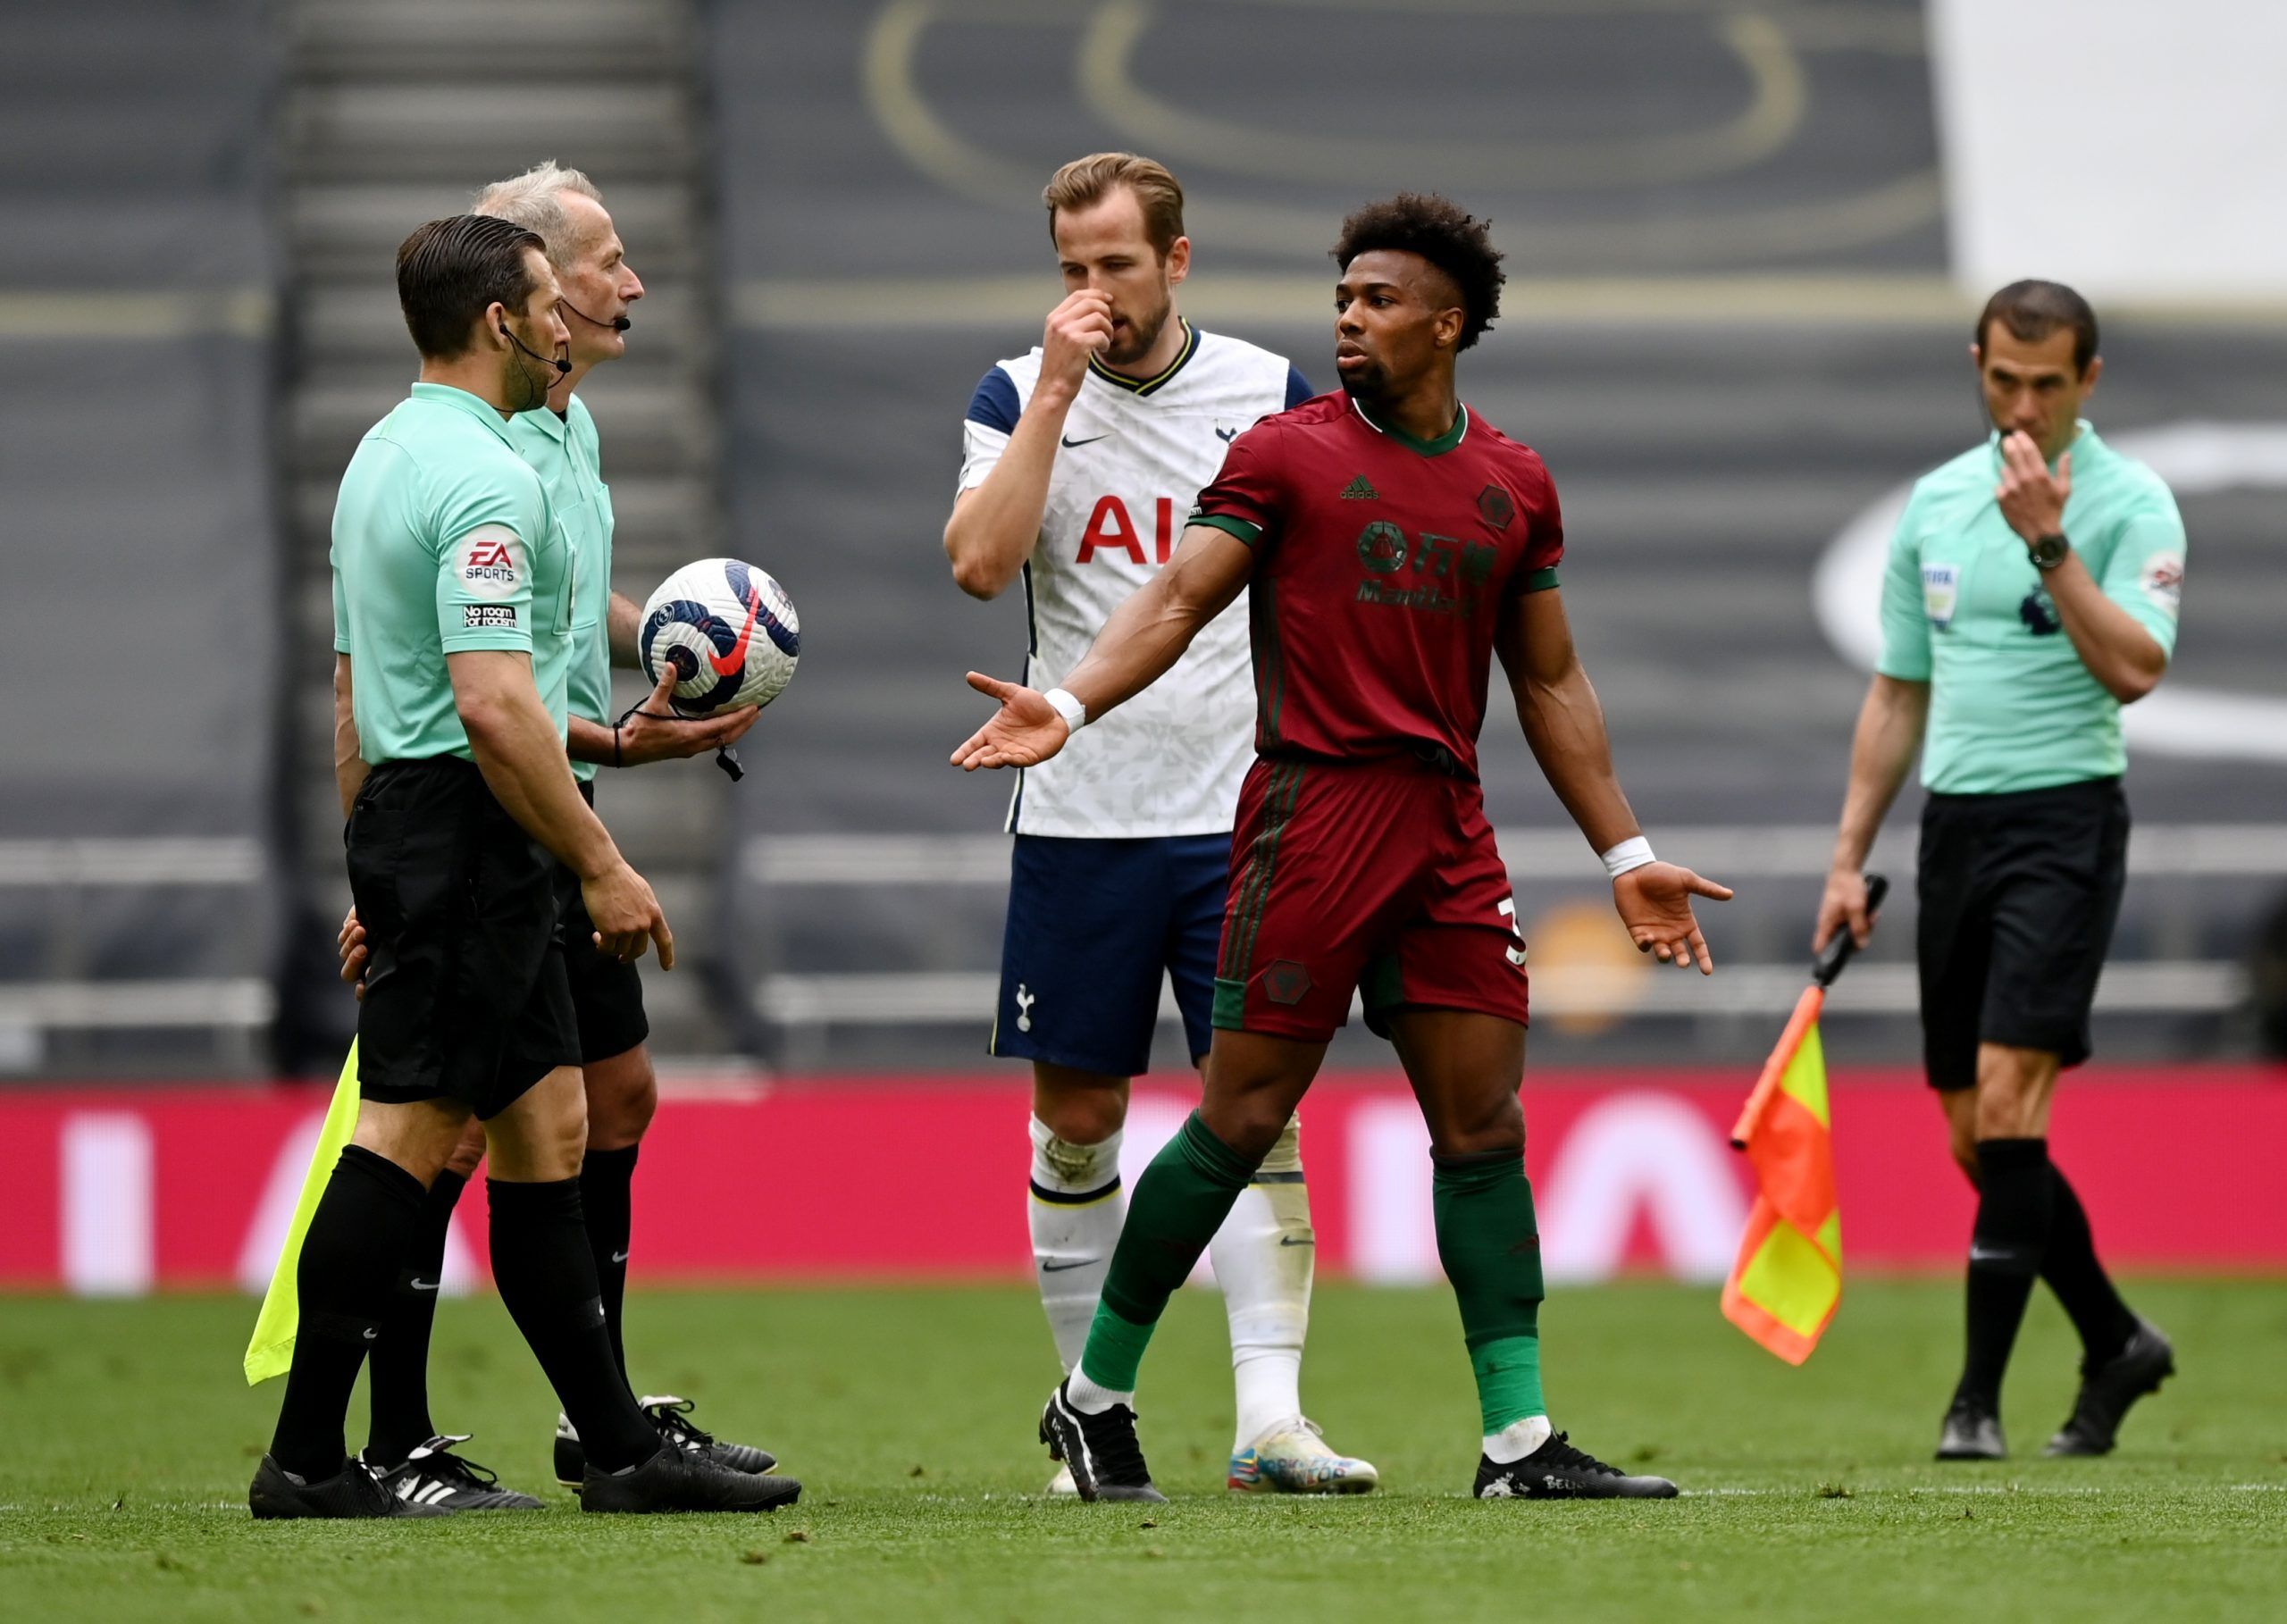 Wolverhampton Wanderers' Adama Traore remonstrates with referee Martin Atkinson at half time vs Spurs